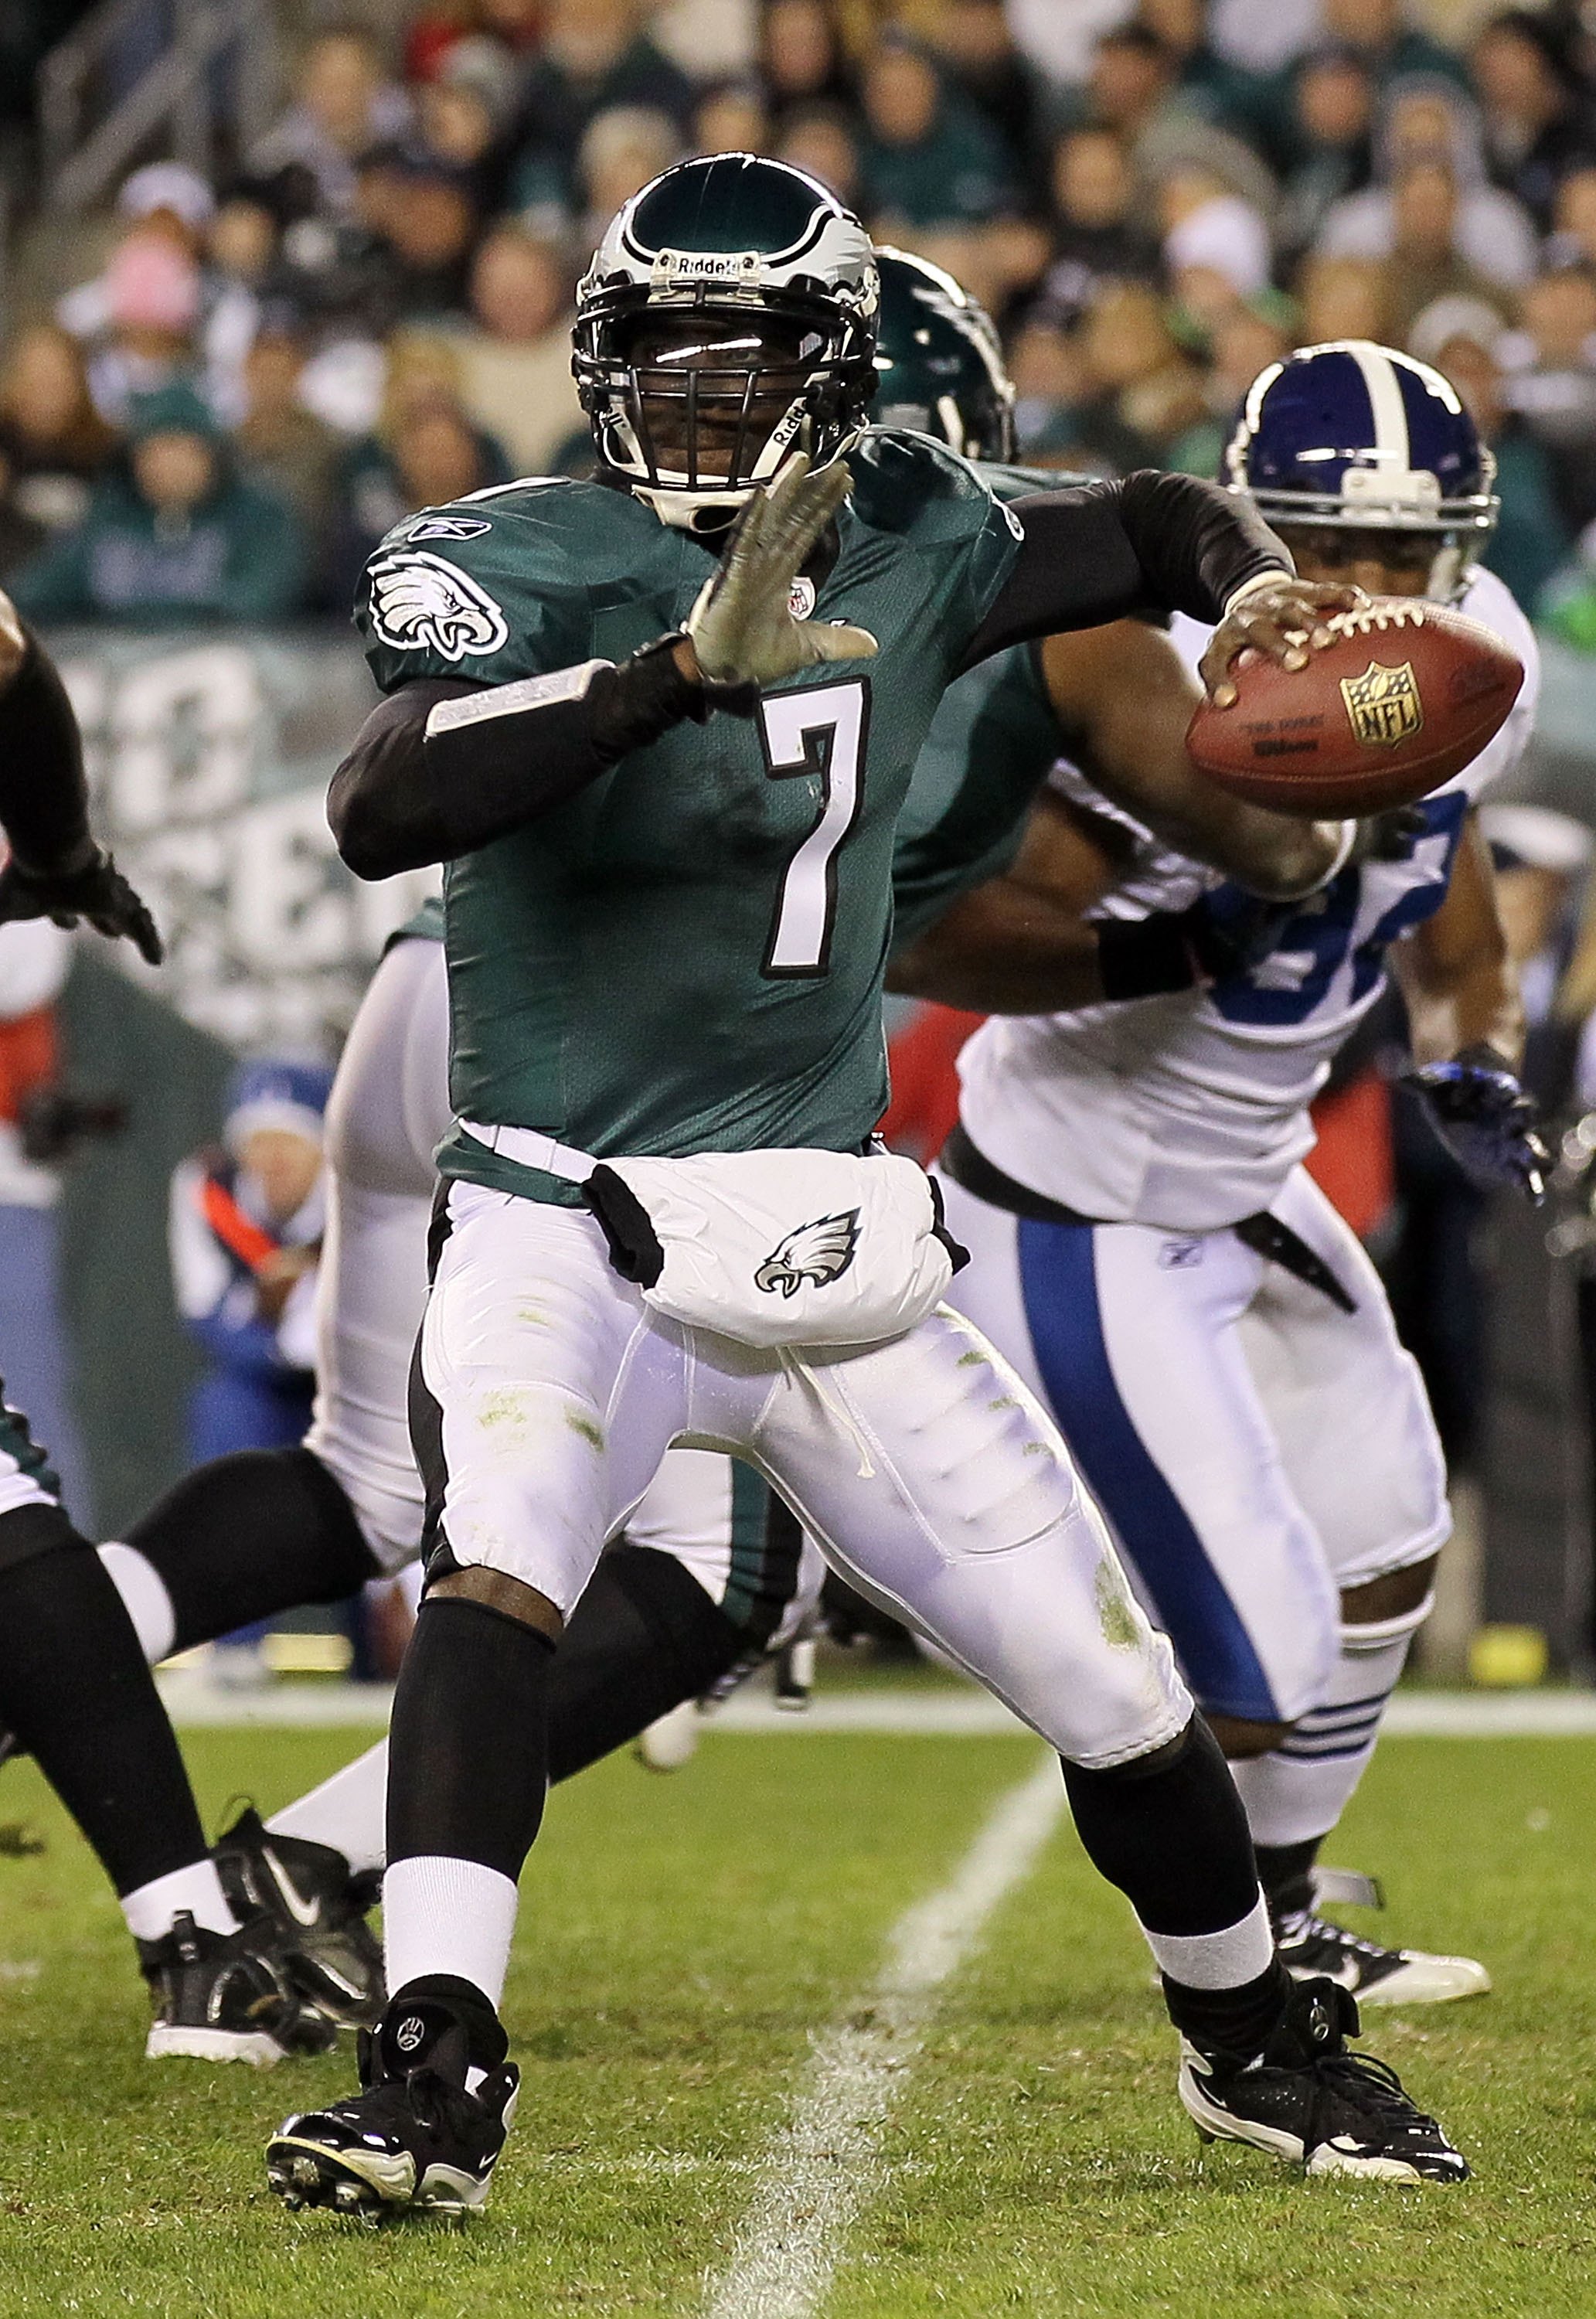 PHILADELPHIA - NOVEMBER 07:  Michael Vick #7 of the Philadelphia Eagles in action against the Indianapolis Colts on November 7, 2010 at Lincoln Financial Field in Philadelphia, Pennsylvania.  (Photo by Jim McIsaac/Getty Images)